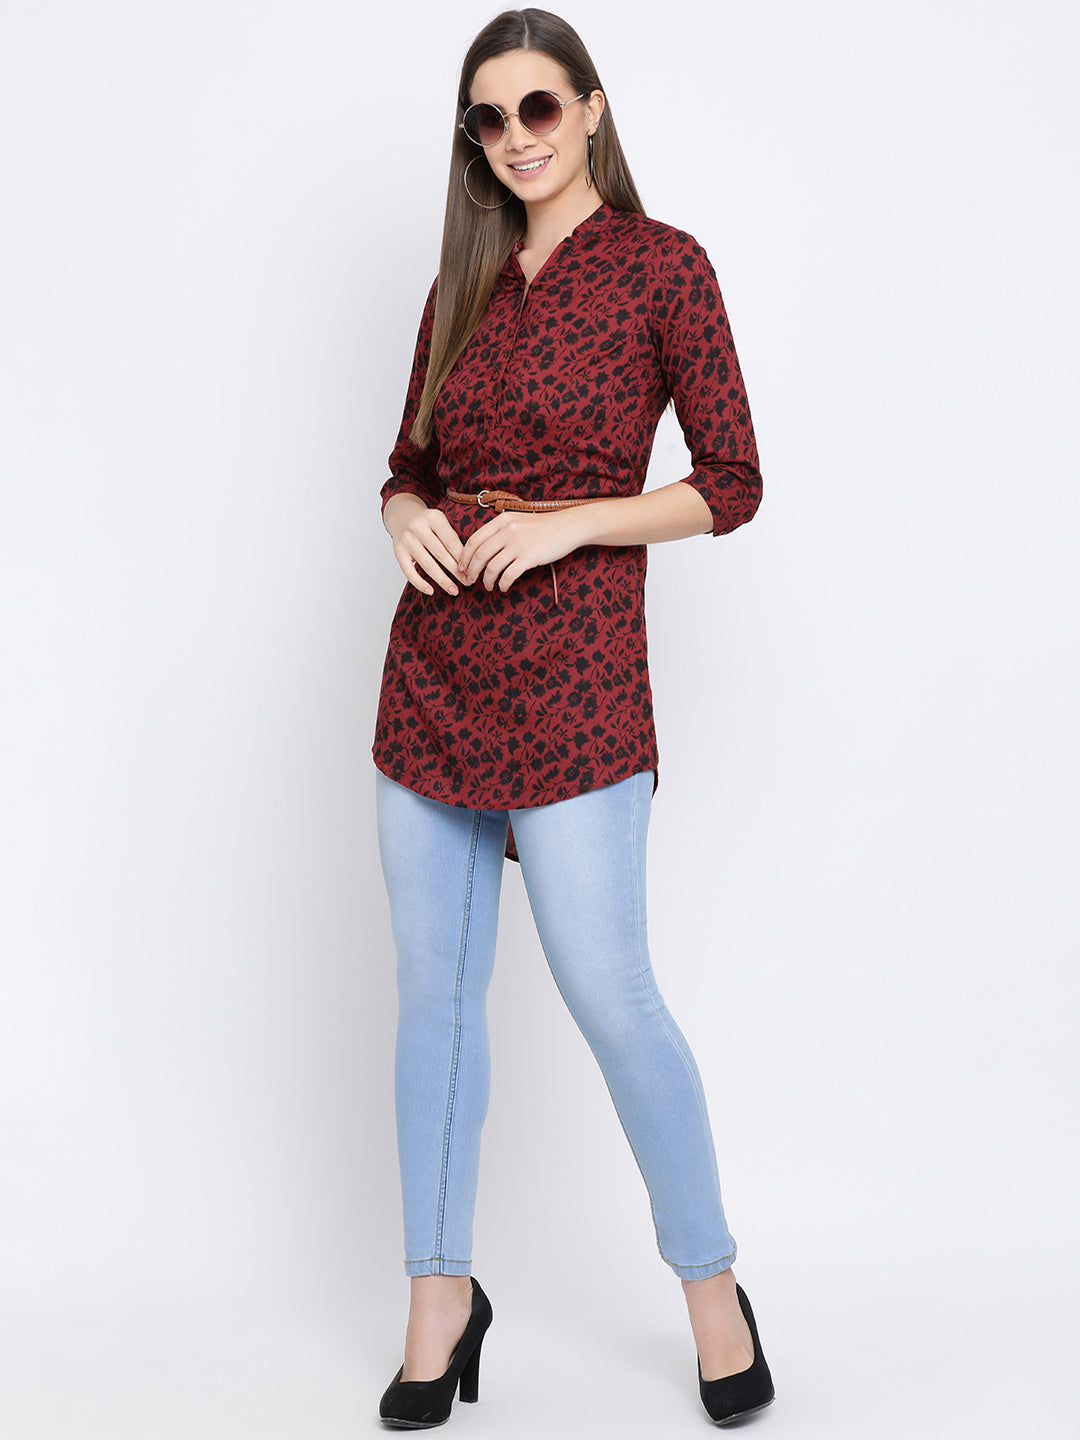 Red Printed V-Neck Top - Women Tops